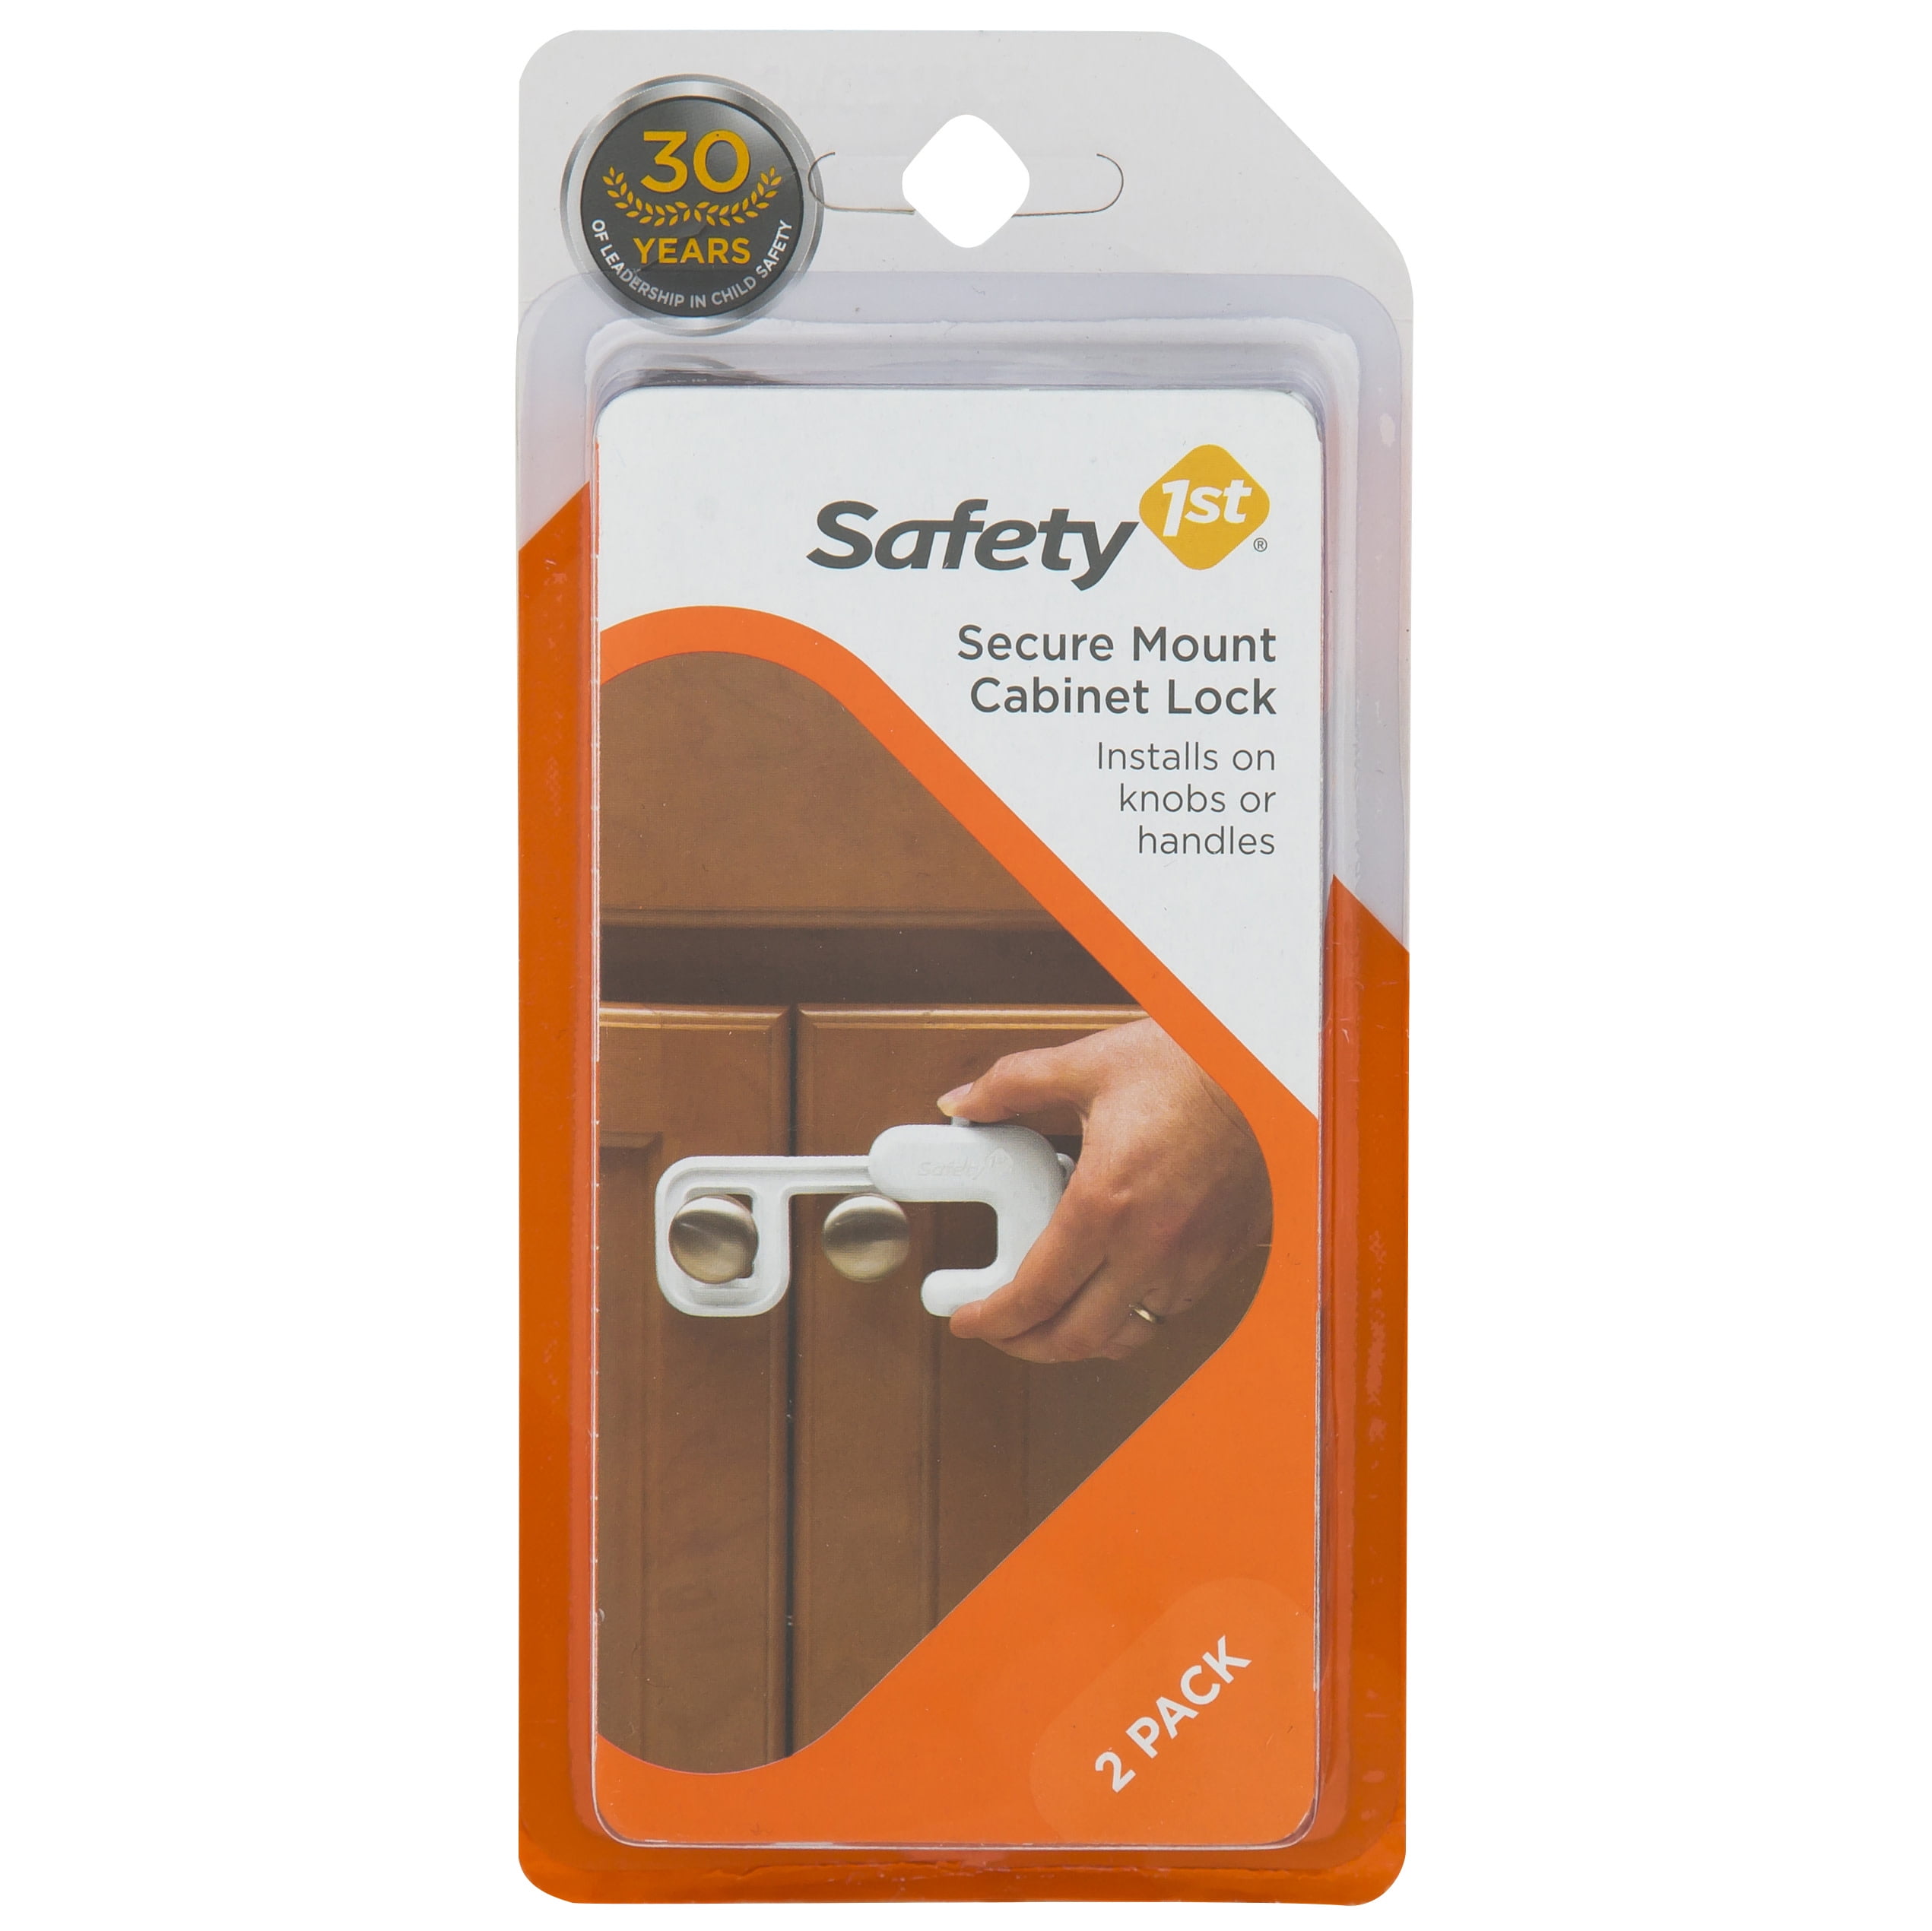 Safety 1st Cabinet Locks Recalled Due to Lock Failure; Children Can Gain  Unintended Access to Dangerous Items